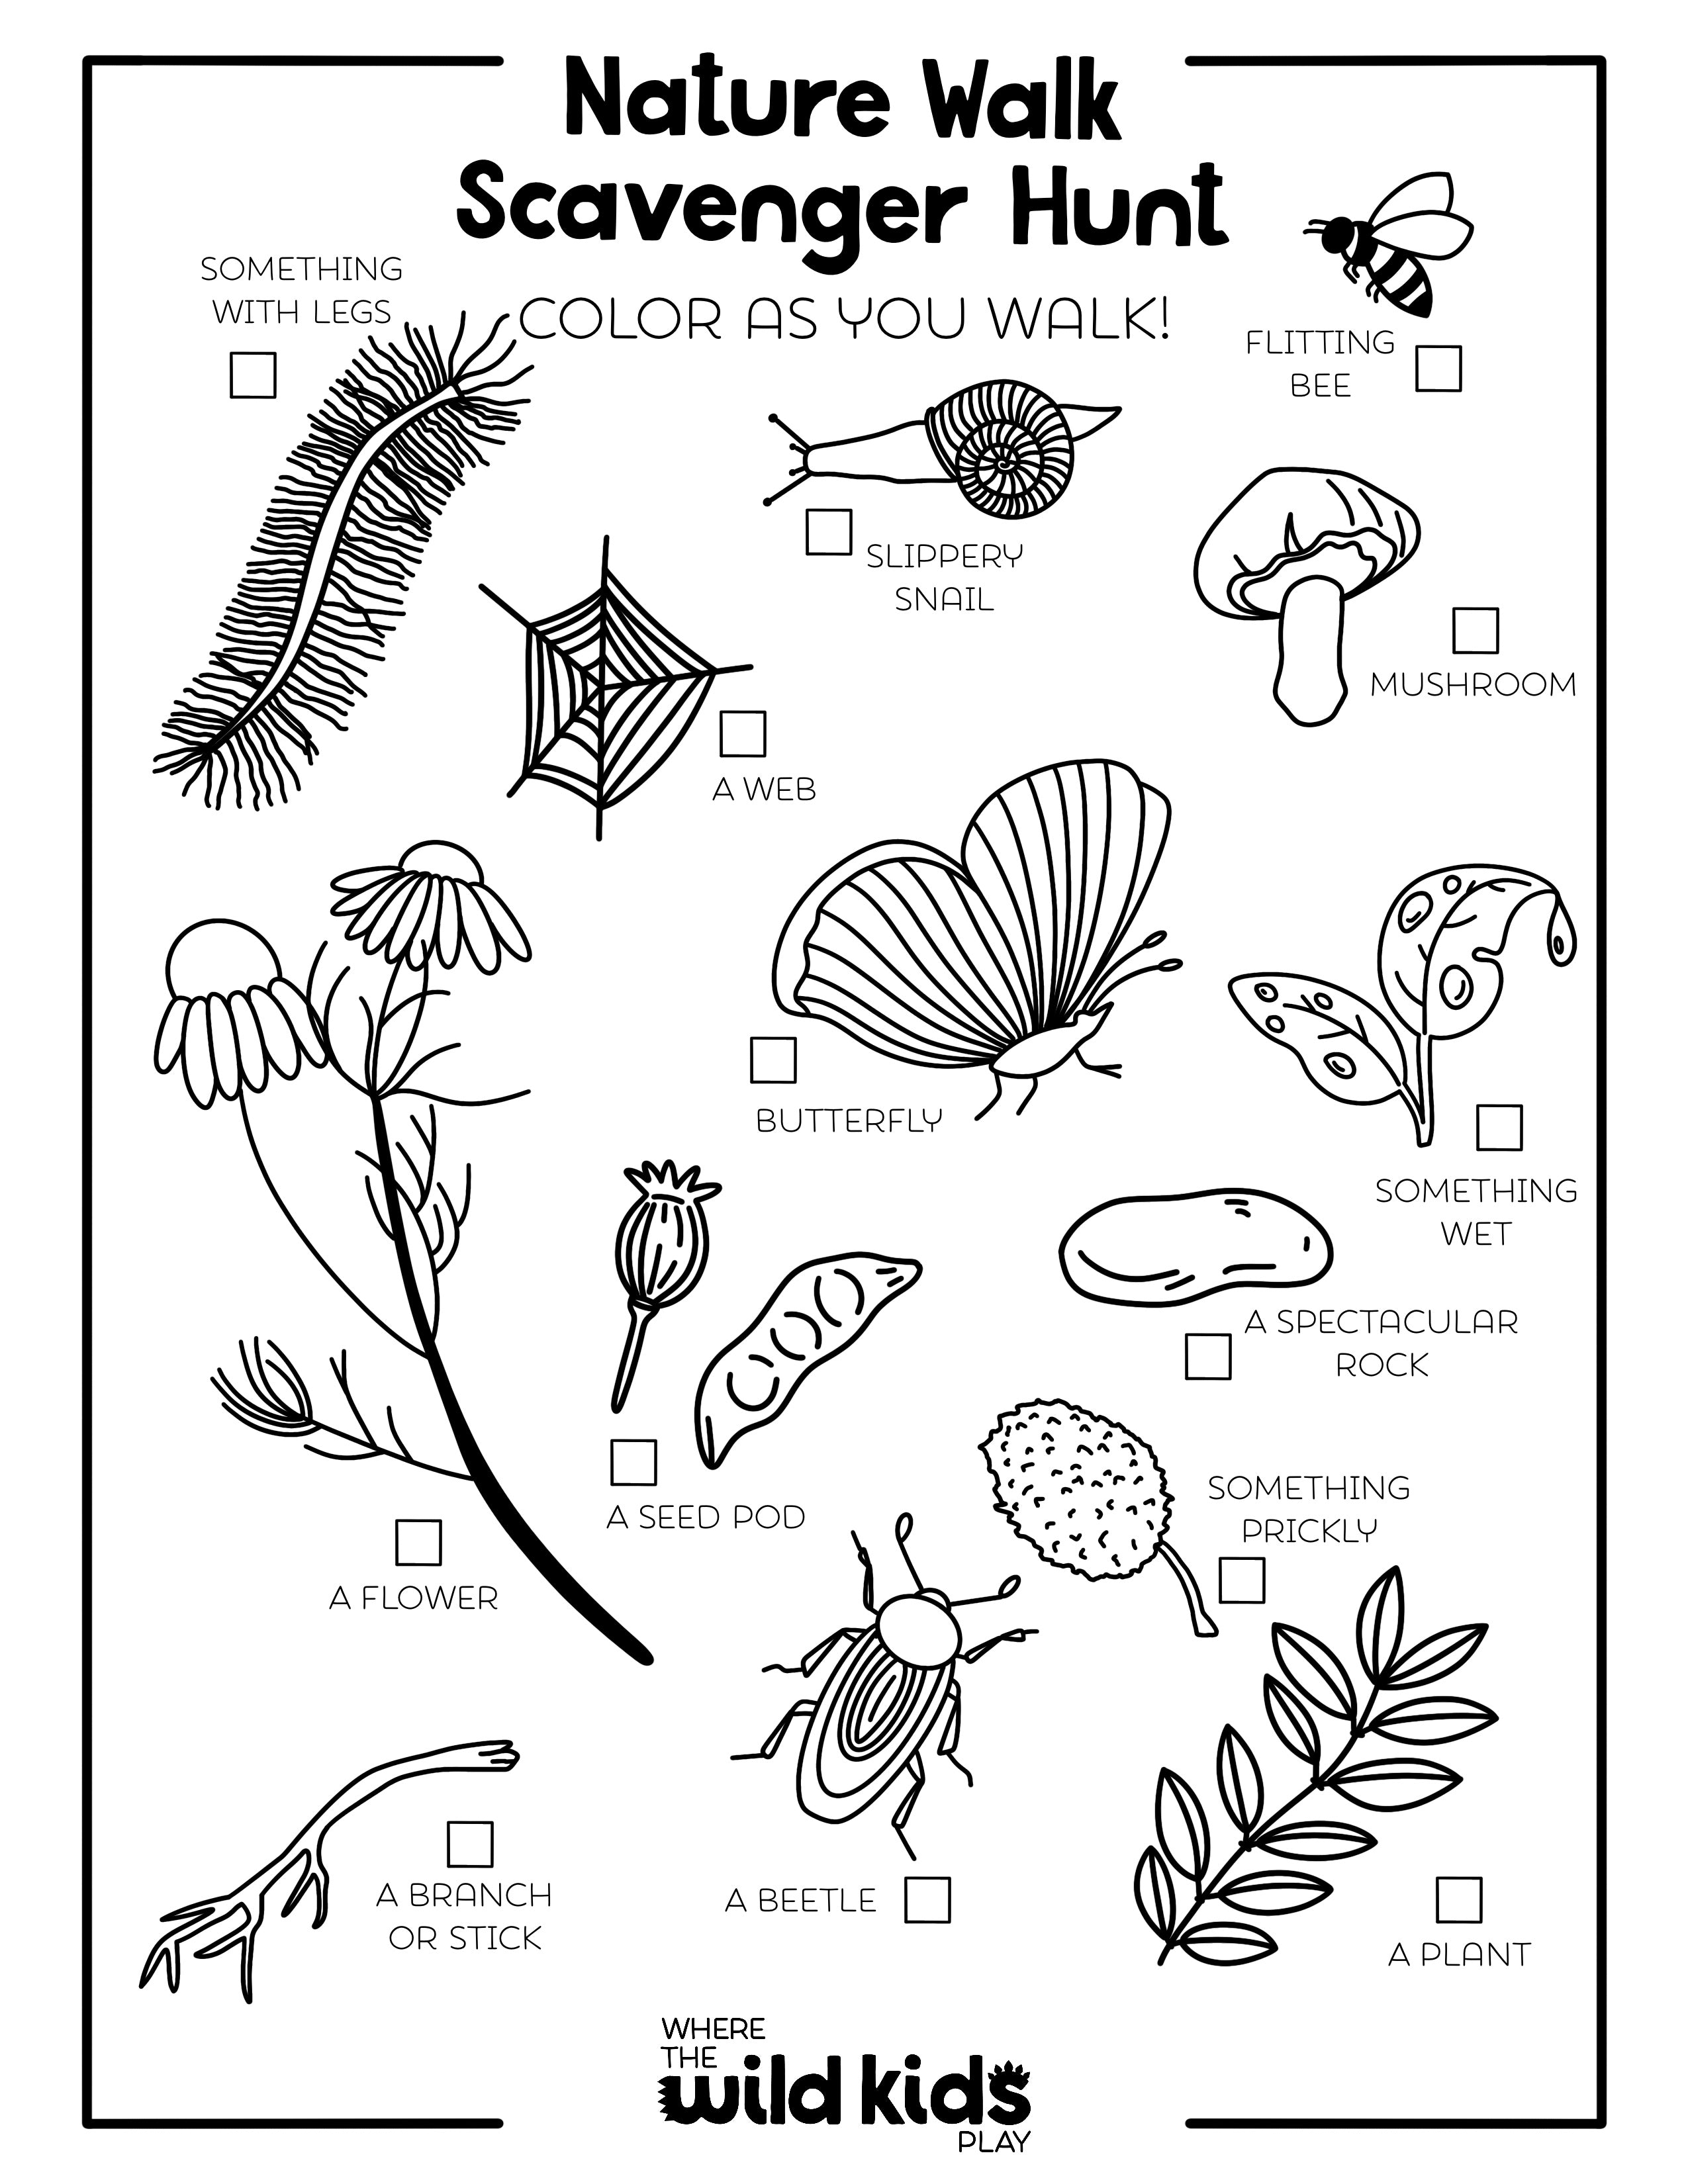 Spring Coloring Pages-5.jpg__PID:1232045a-50d0-4712-b689-17ddbb3037f5